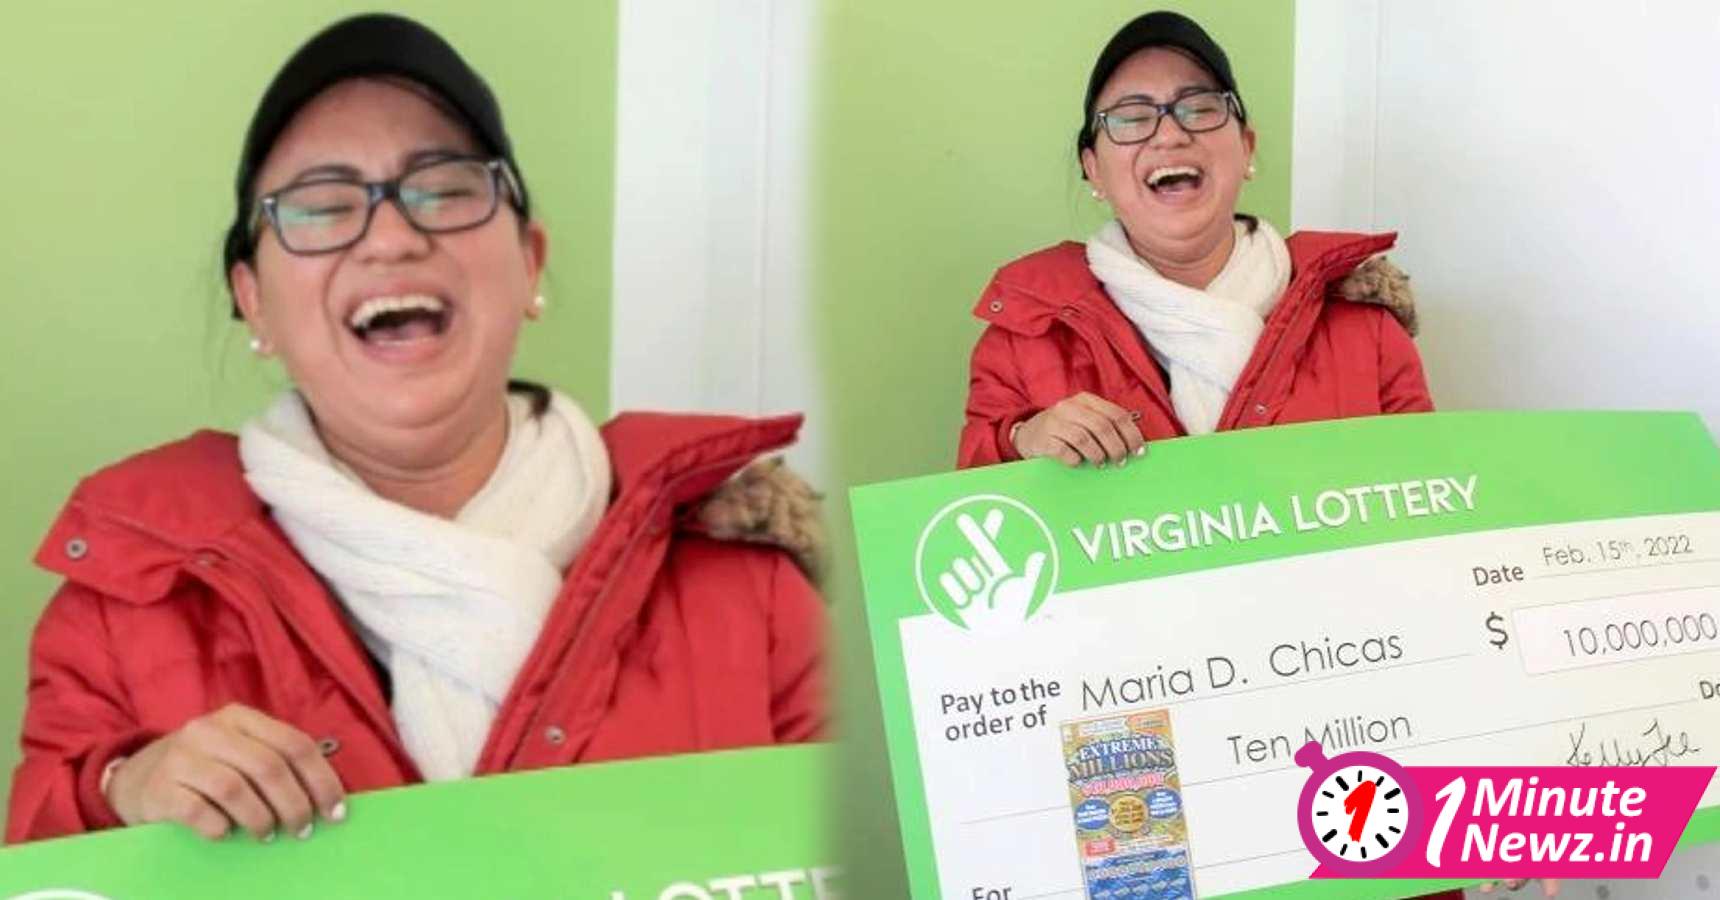 husband gifts wife lottery ticket on valentines day wins top price worth 10 million